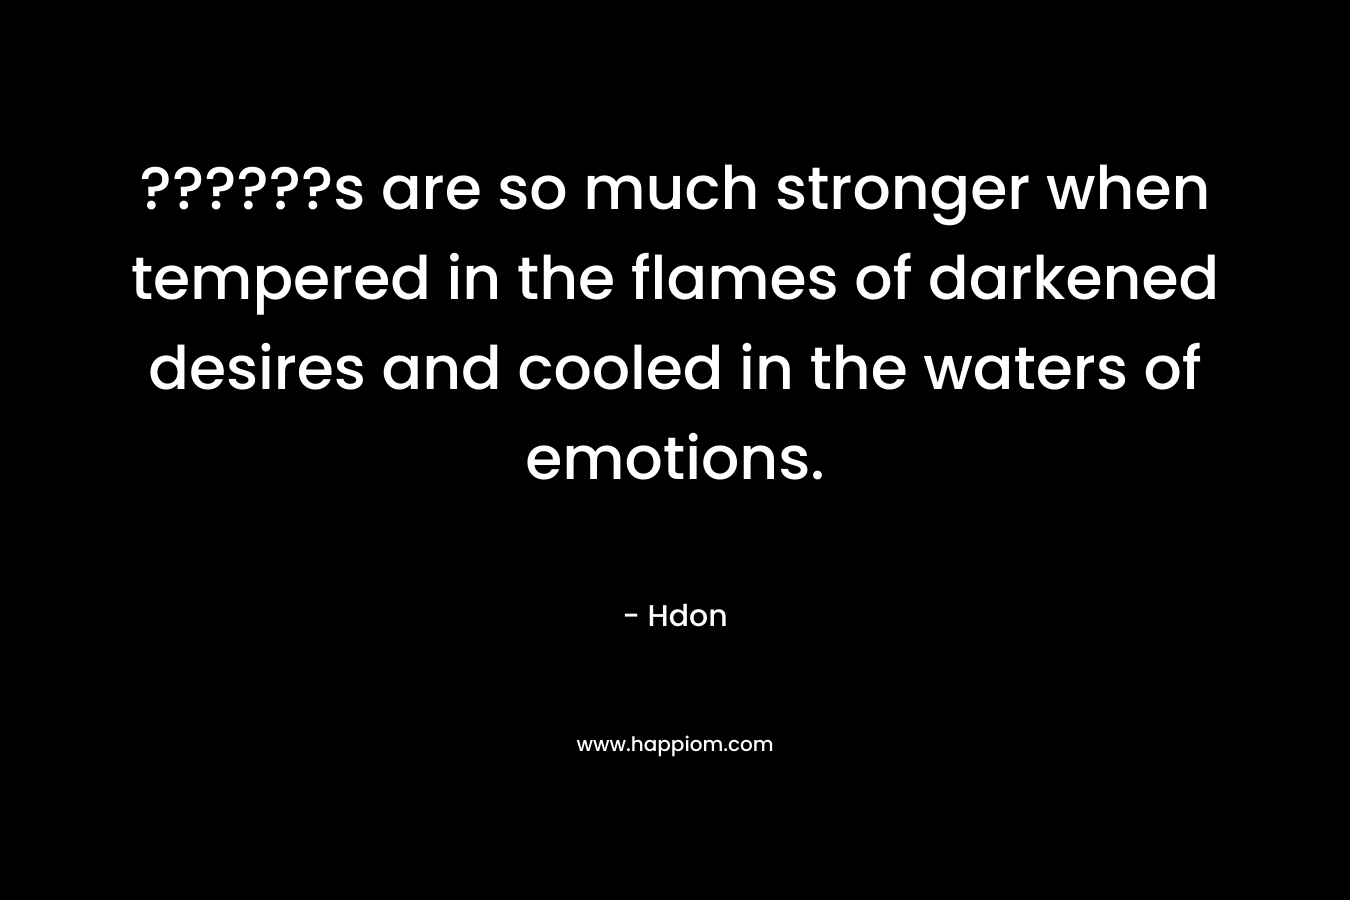 ??????s are so much stronger when tempered in the flames of darkened desires and cooled in the waters of emotions.